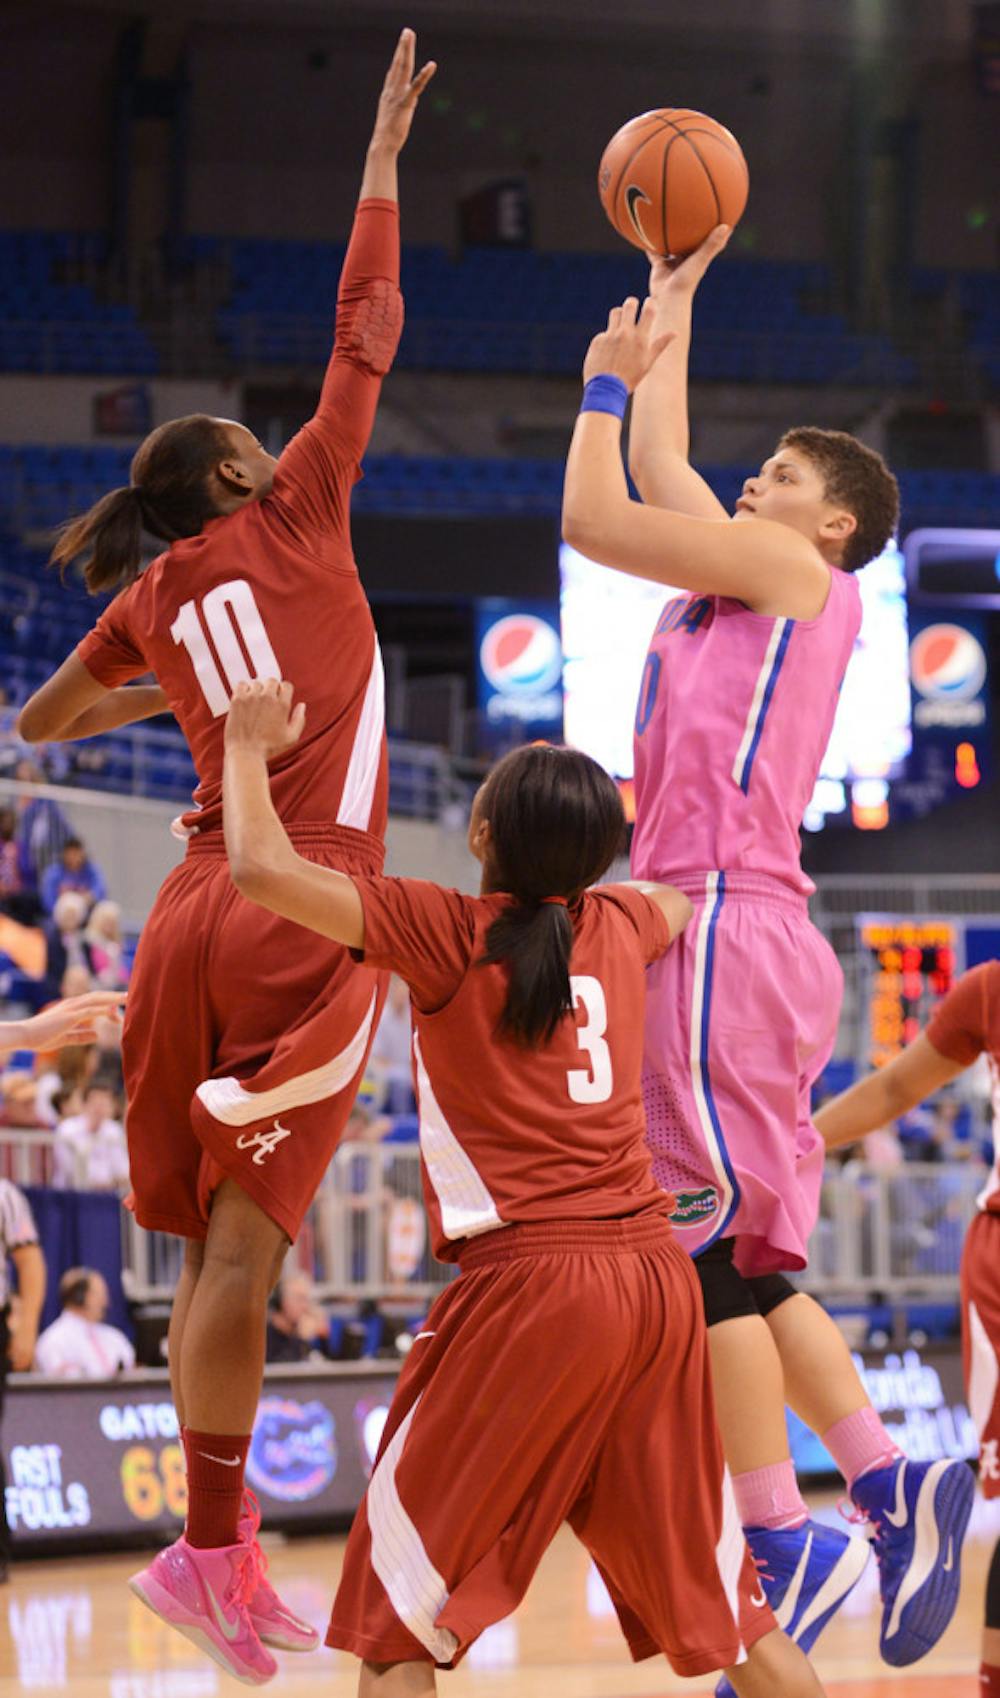 <p class="p1"><span class="s1">Freshman guard Sydney Moss (right) attempts a shot during Florida’s 87-54 victory against Alabama on Feb. 3 in the O’Connell Center. Moss announced that she will transfer from Florida on Tuesday.</span></p>